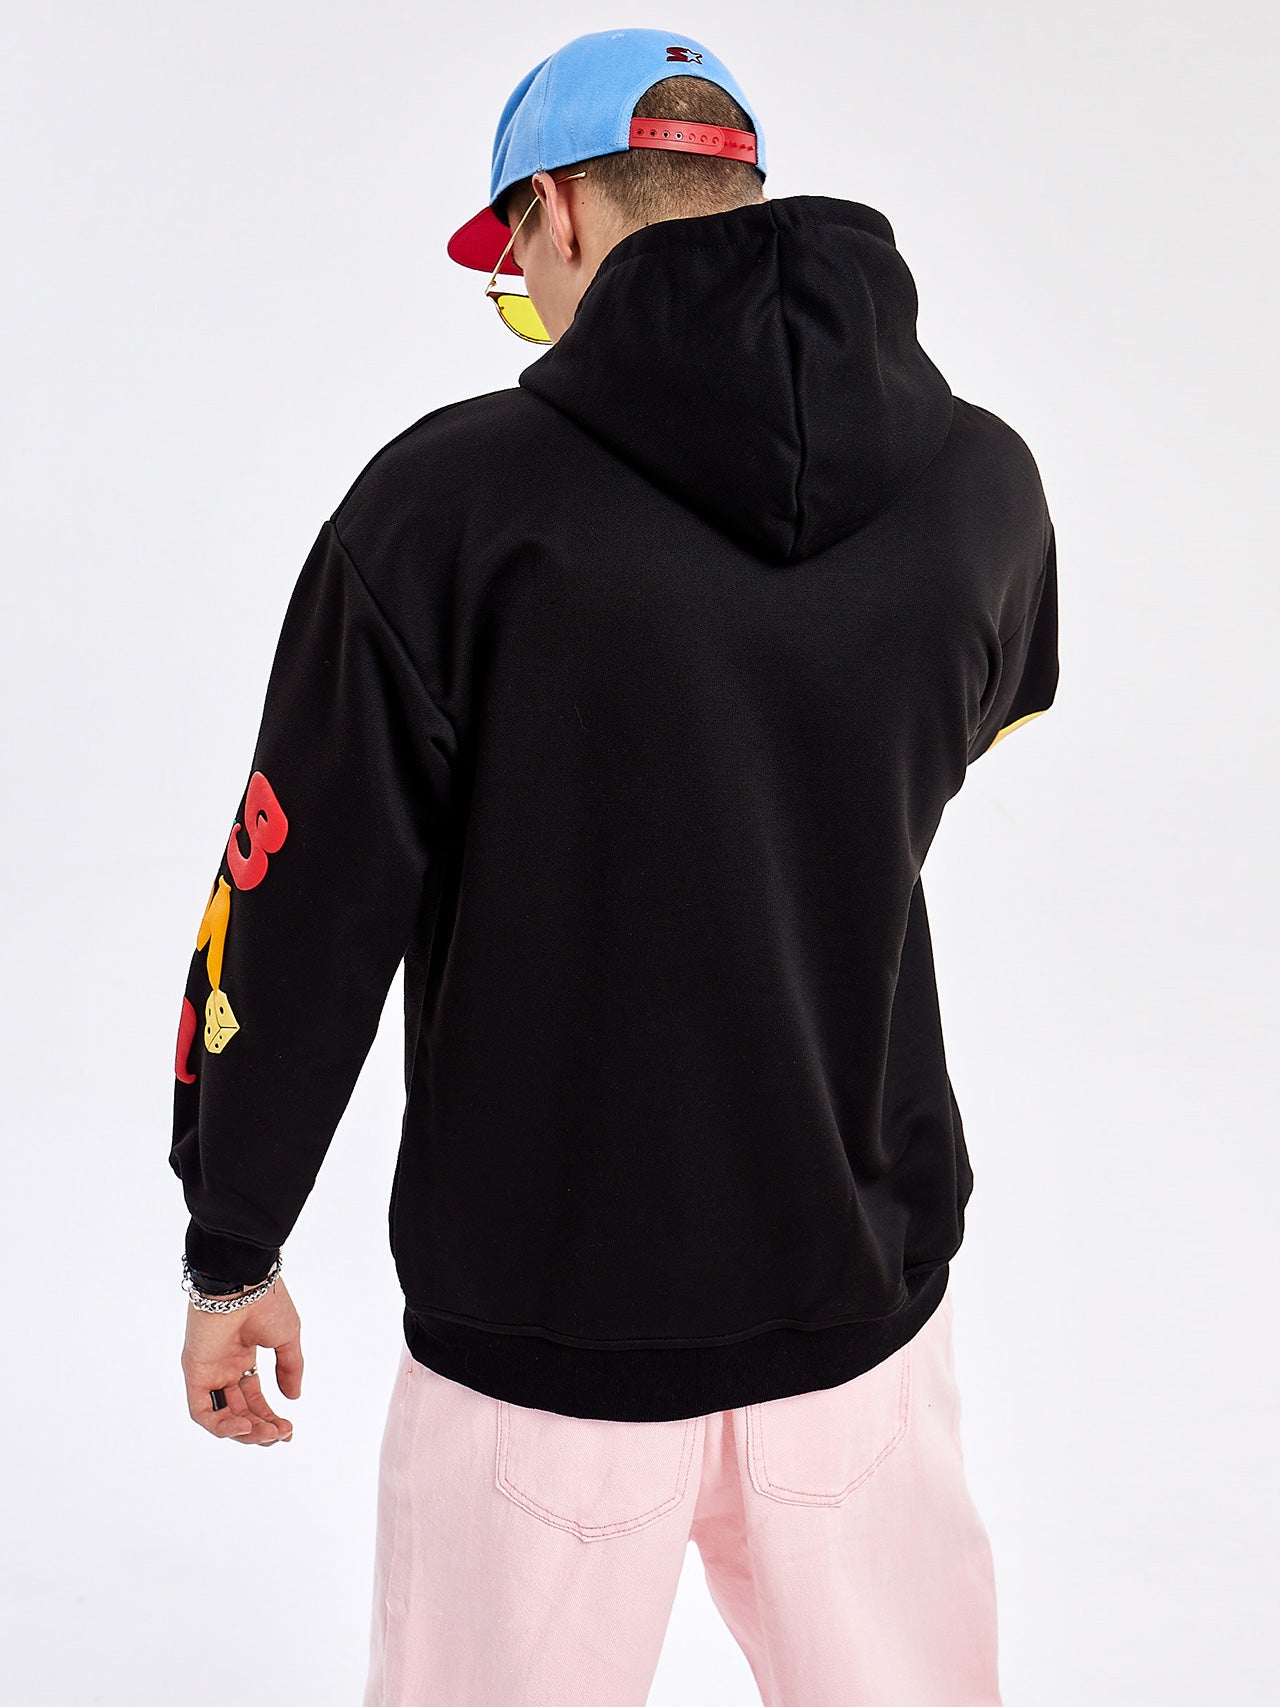 JUSTNOTAG Casual Letter Hooded Hoodies